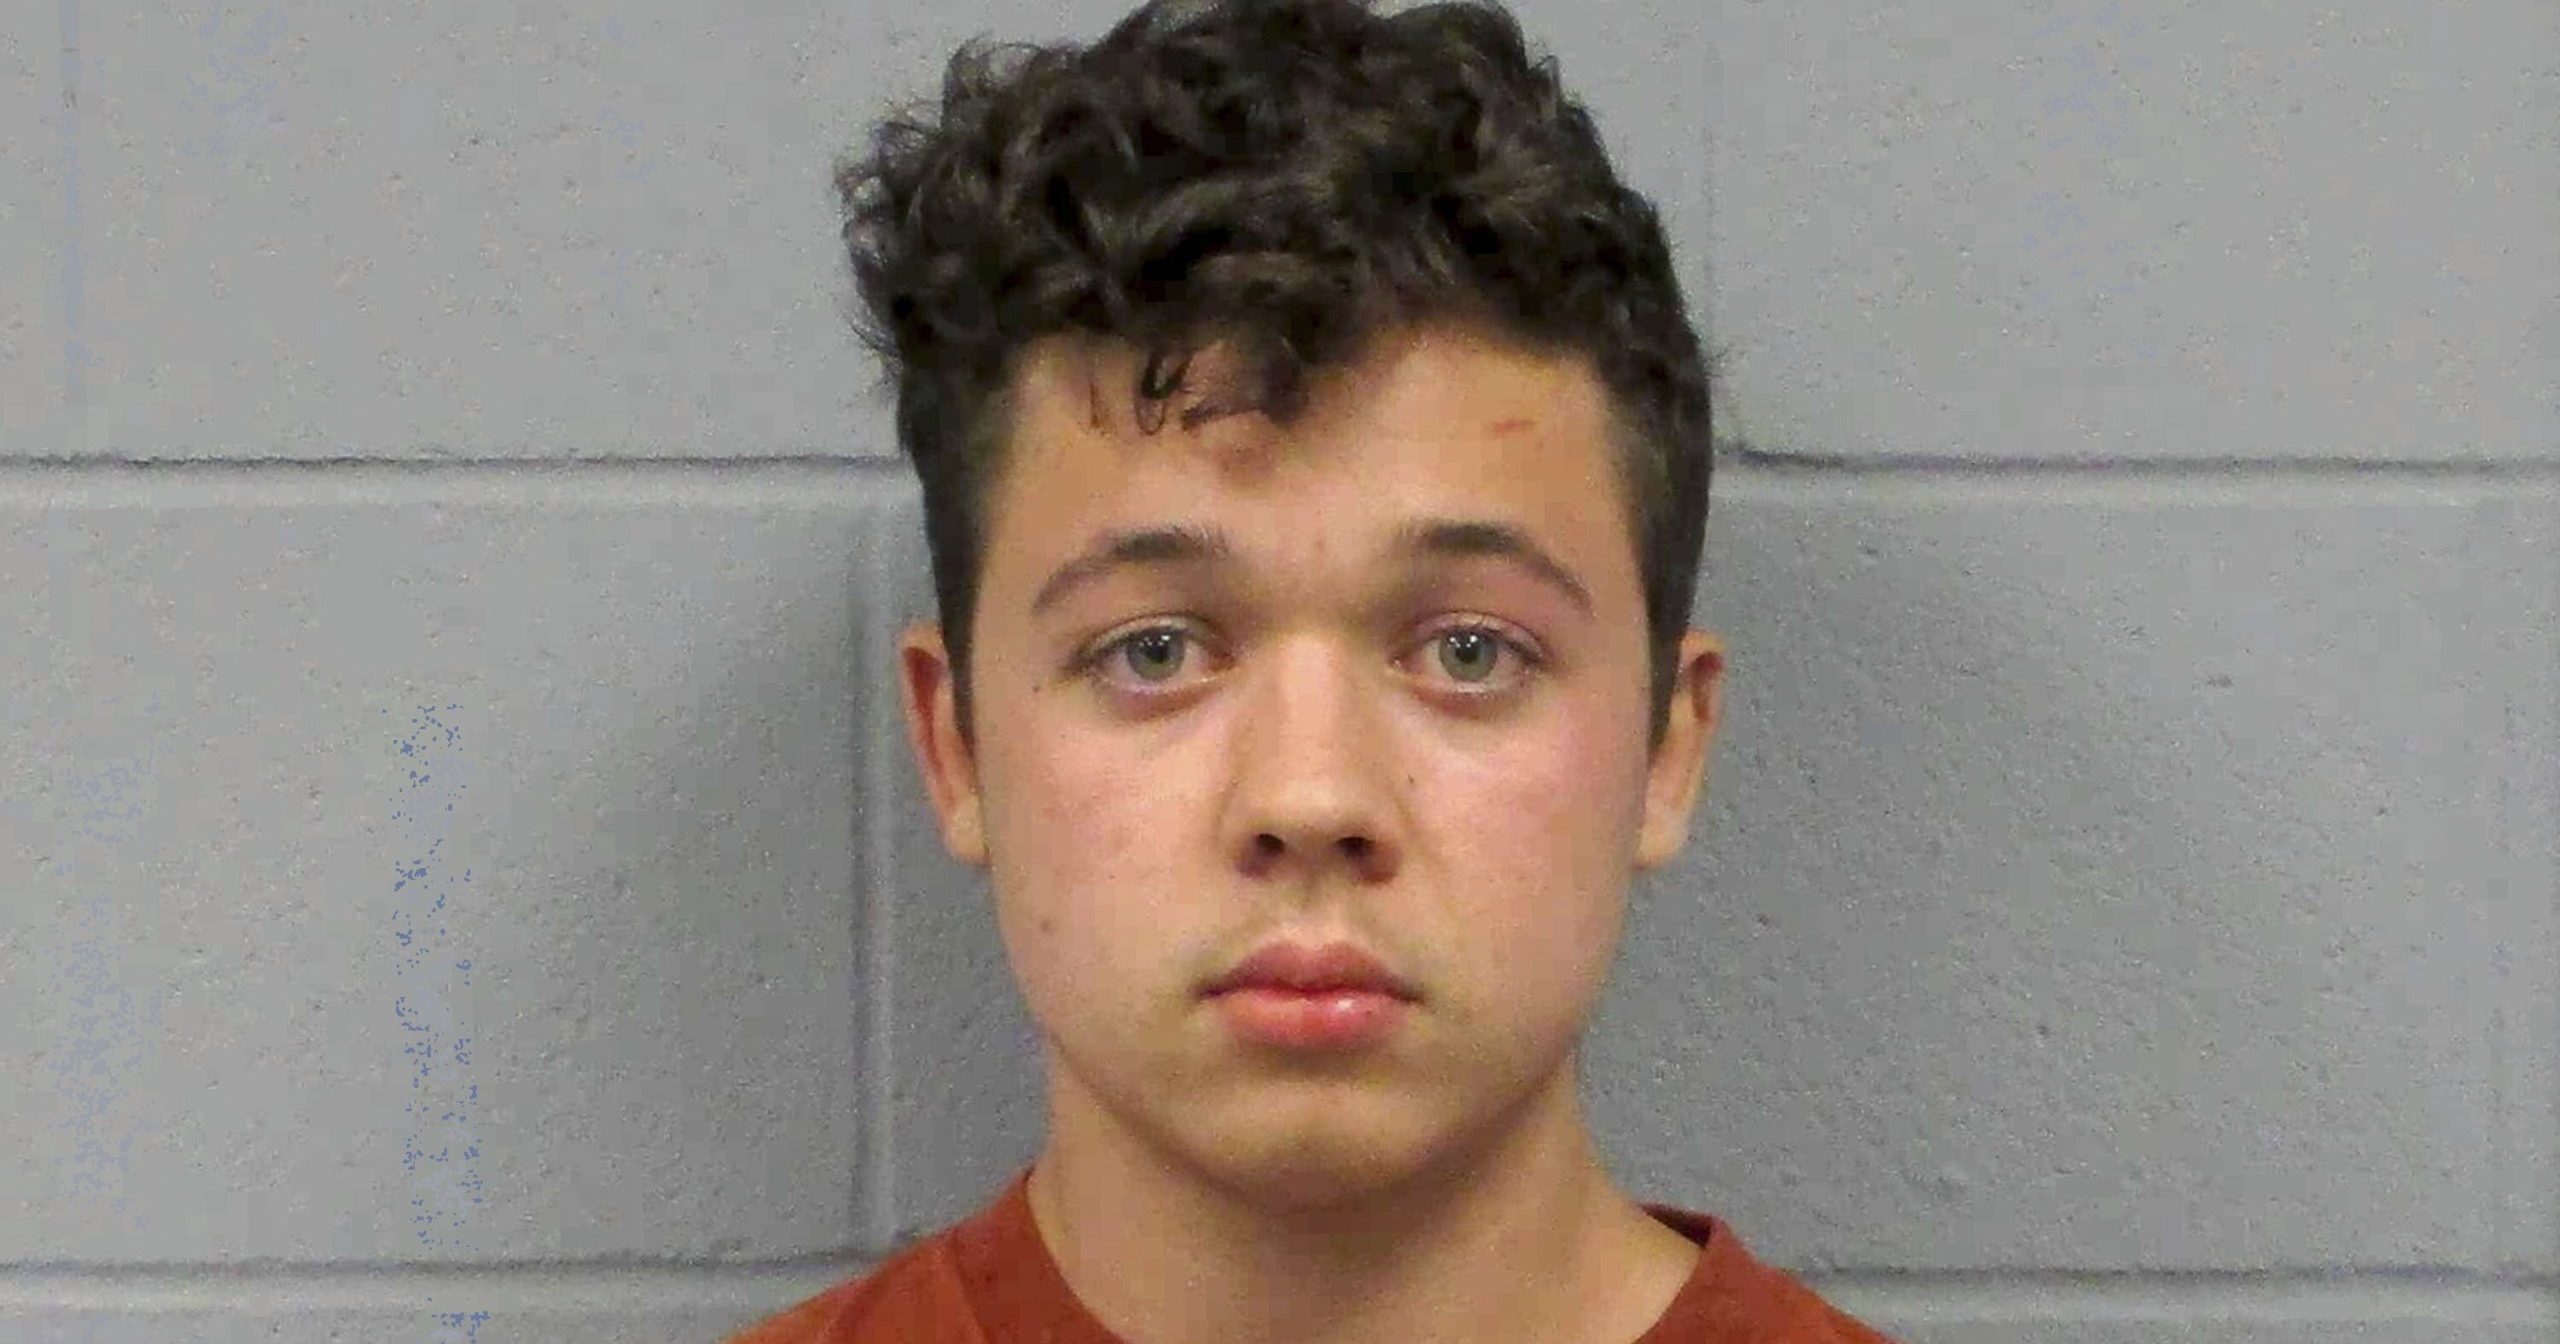 This undated booking photo from the Antioch Police Department shows Kyle Rittenhouse, who has been charged with fatally shooting two men and injuring a third during a riot in Kenosha, Wisconsin, in August 2020.